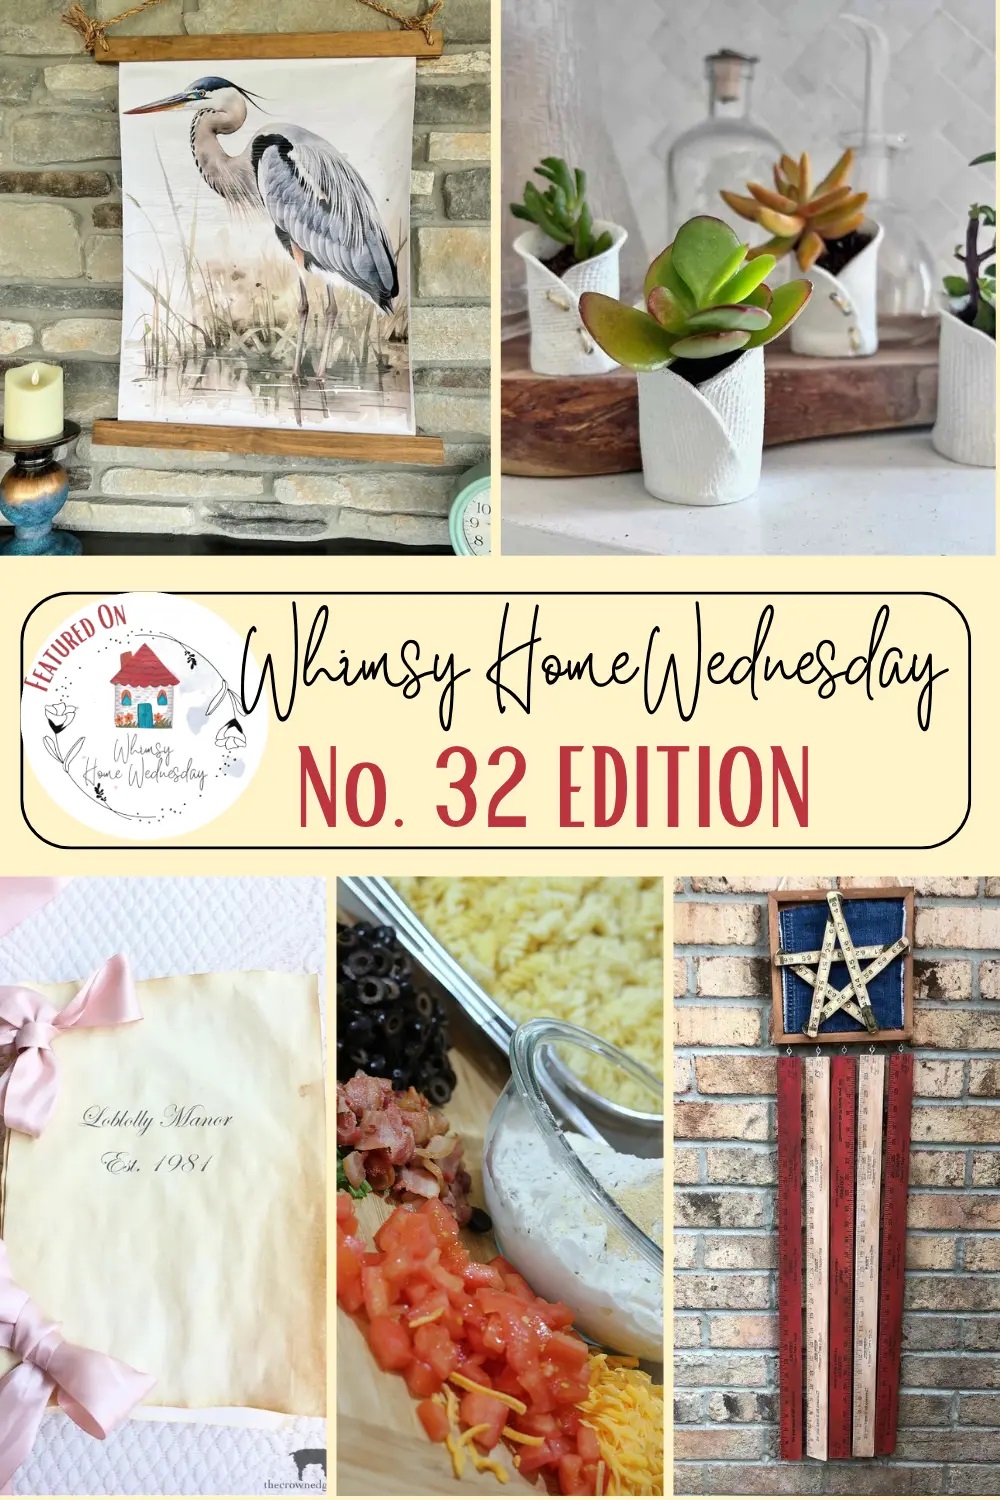 Join us on Whimsy Home Wednesday Blog Link Party No. 32 and see host projects, the features from the previous week and link up your posts!